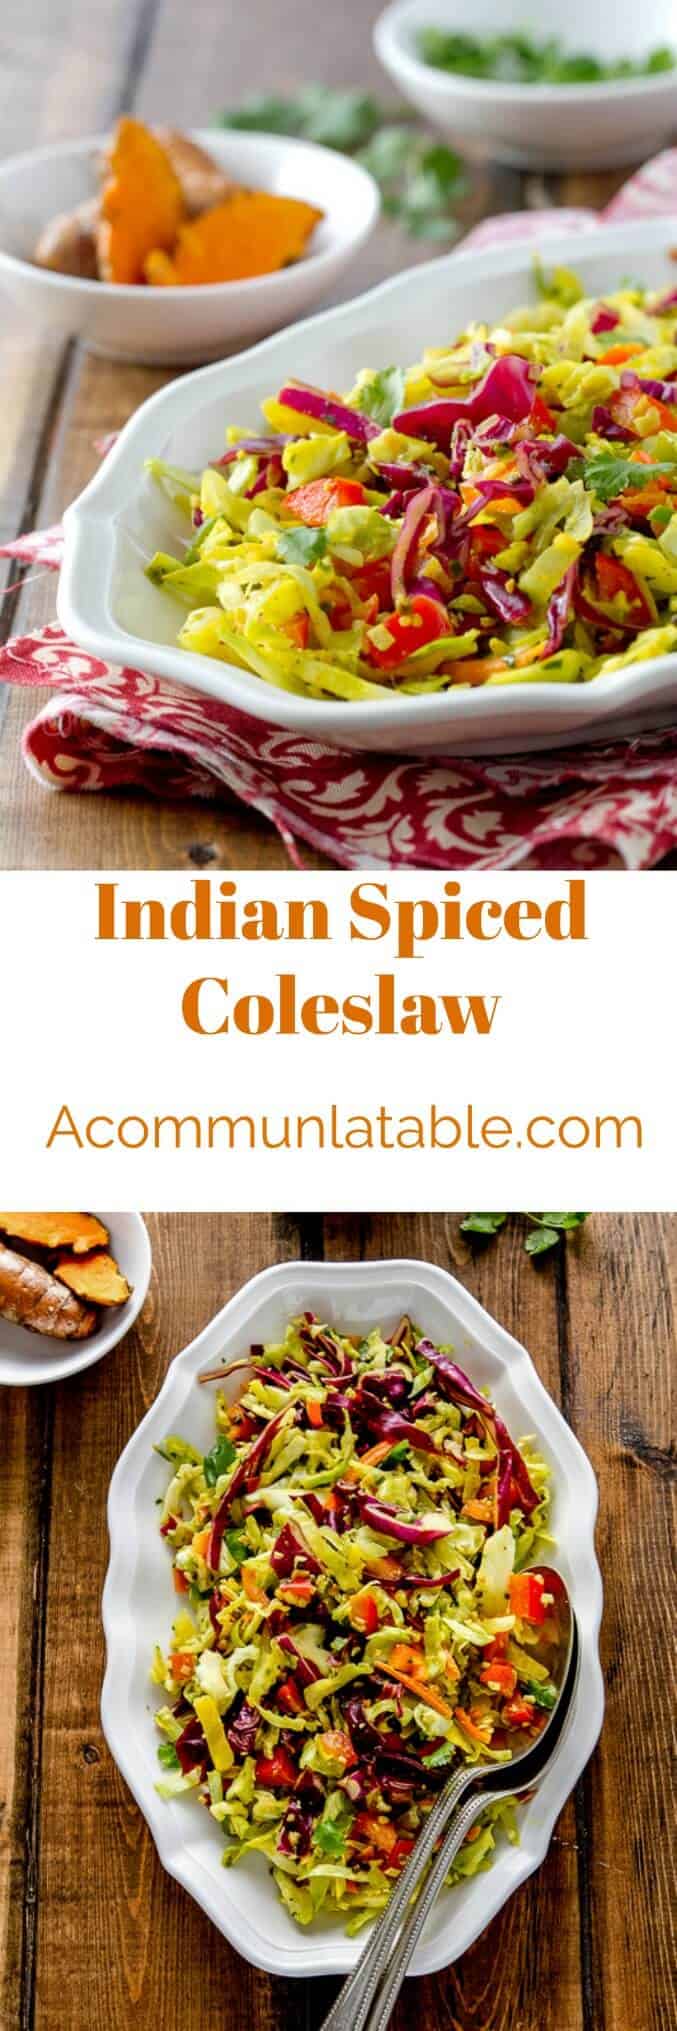 Indian spiced coleslaw is a healthy, no mayo recipe with a lovely turmeric spiced dressing that goes with almost anything!